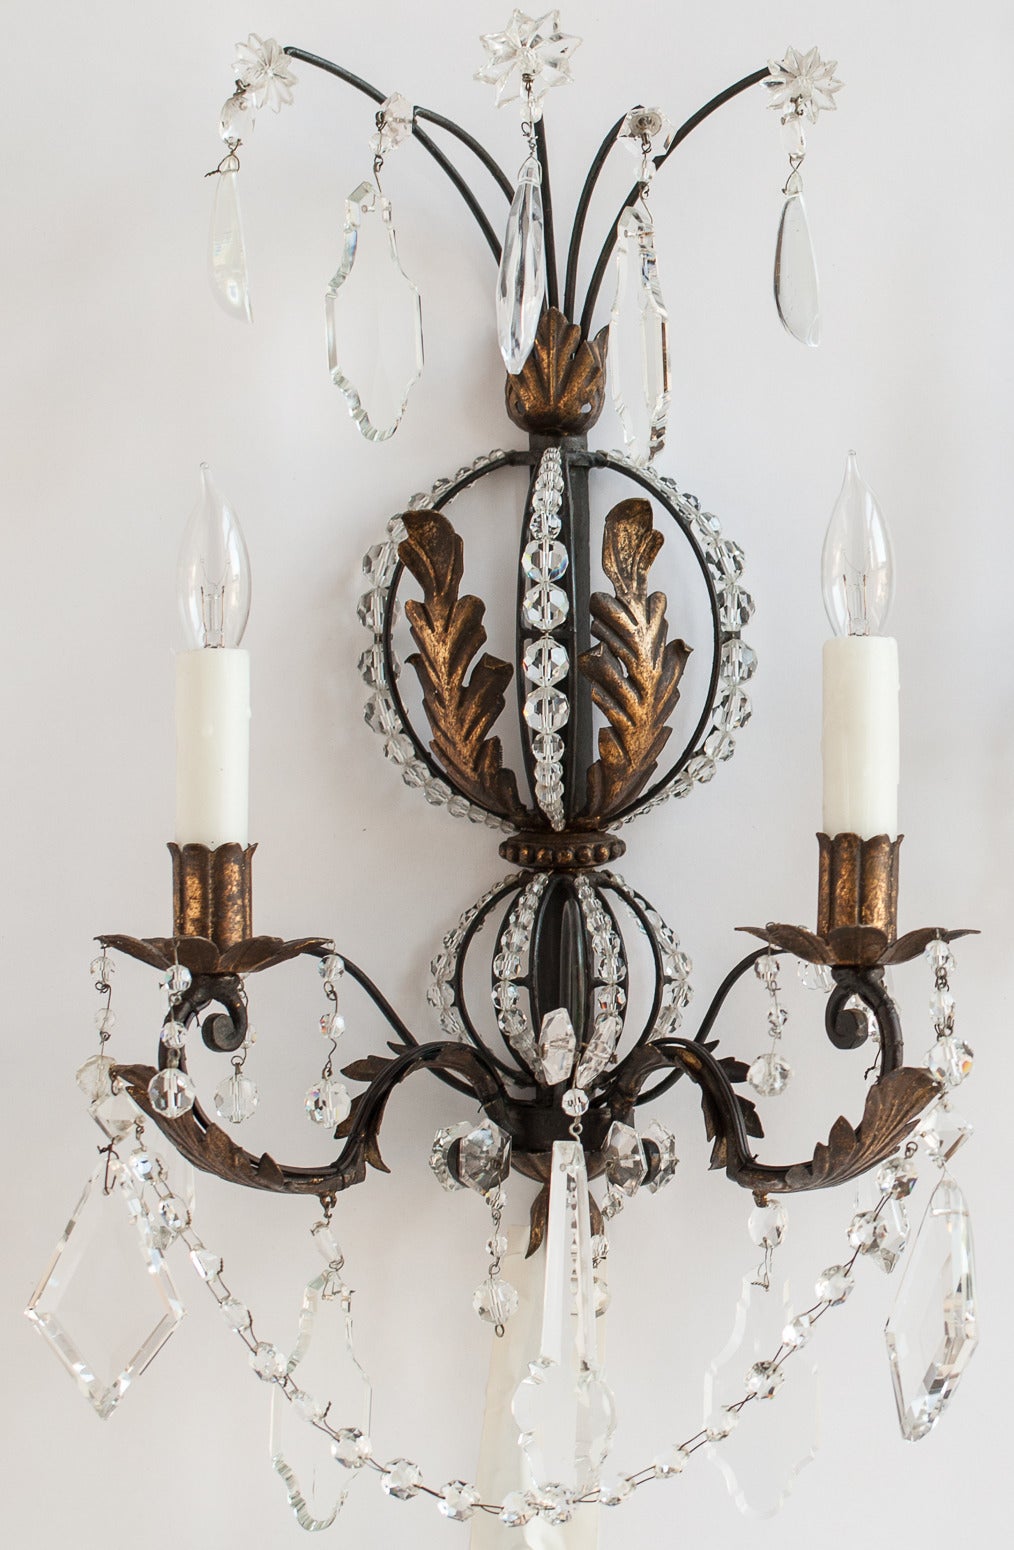 A glamorous pair of French gilt leaf and crystal sconces with two lights and beeswax holders. The sconces have two graduated circles of crystal beads and leaves in the center ending with two lights and a series of large crystals at the bottom. At